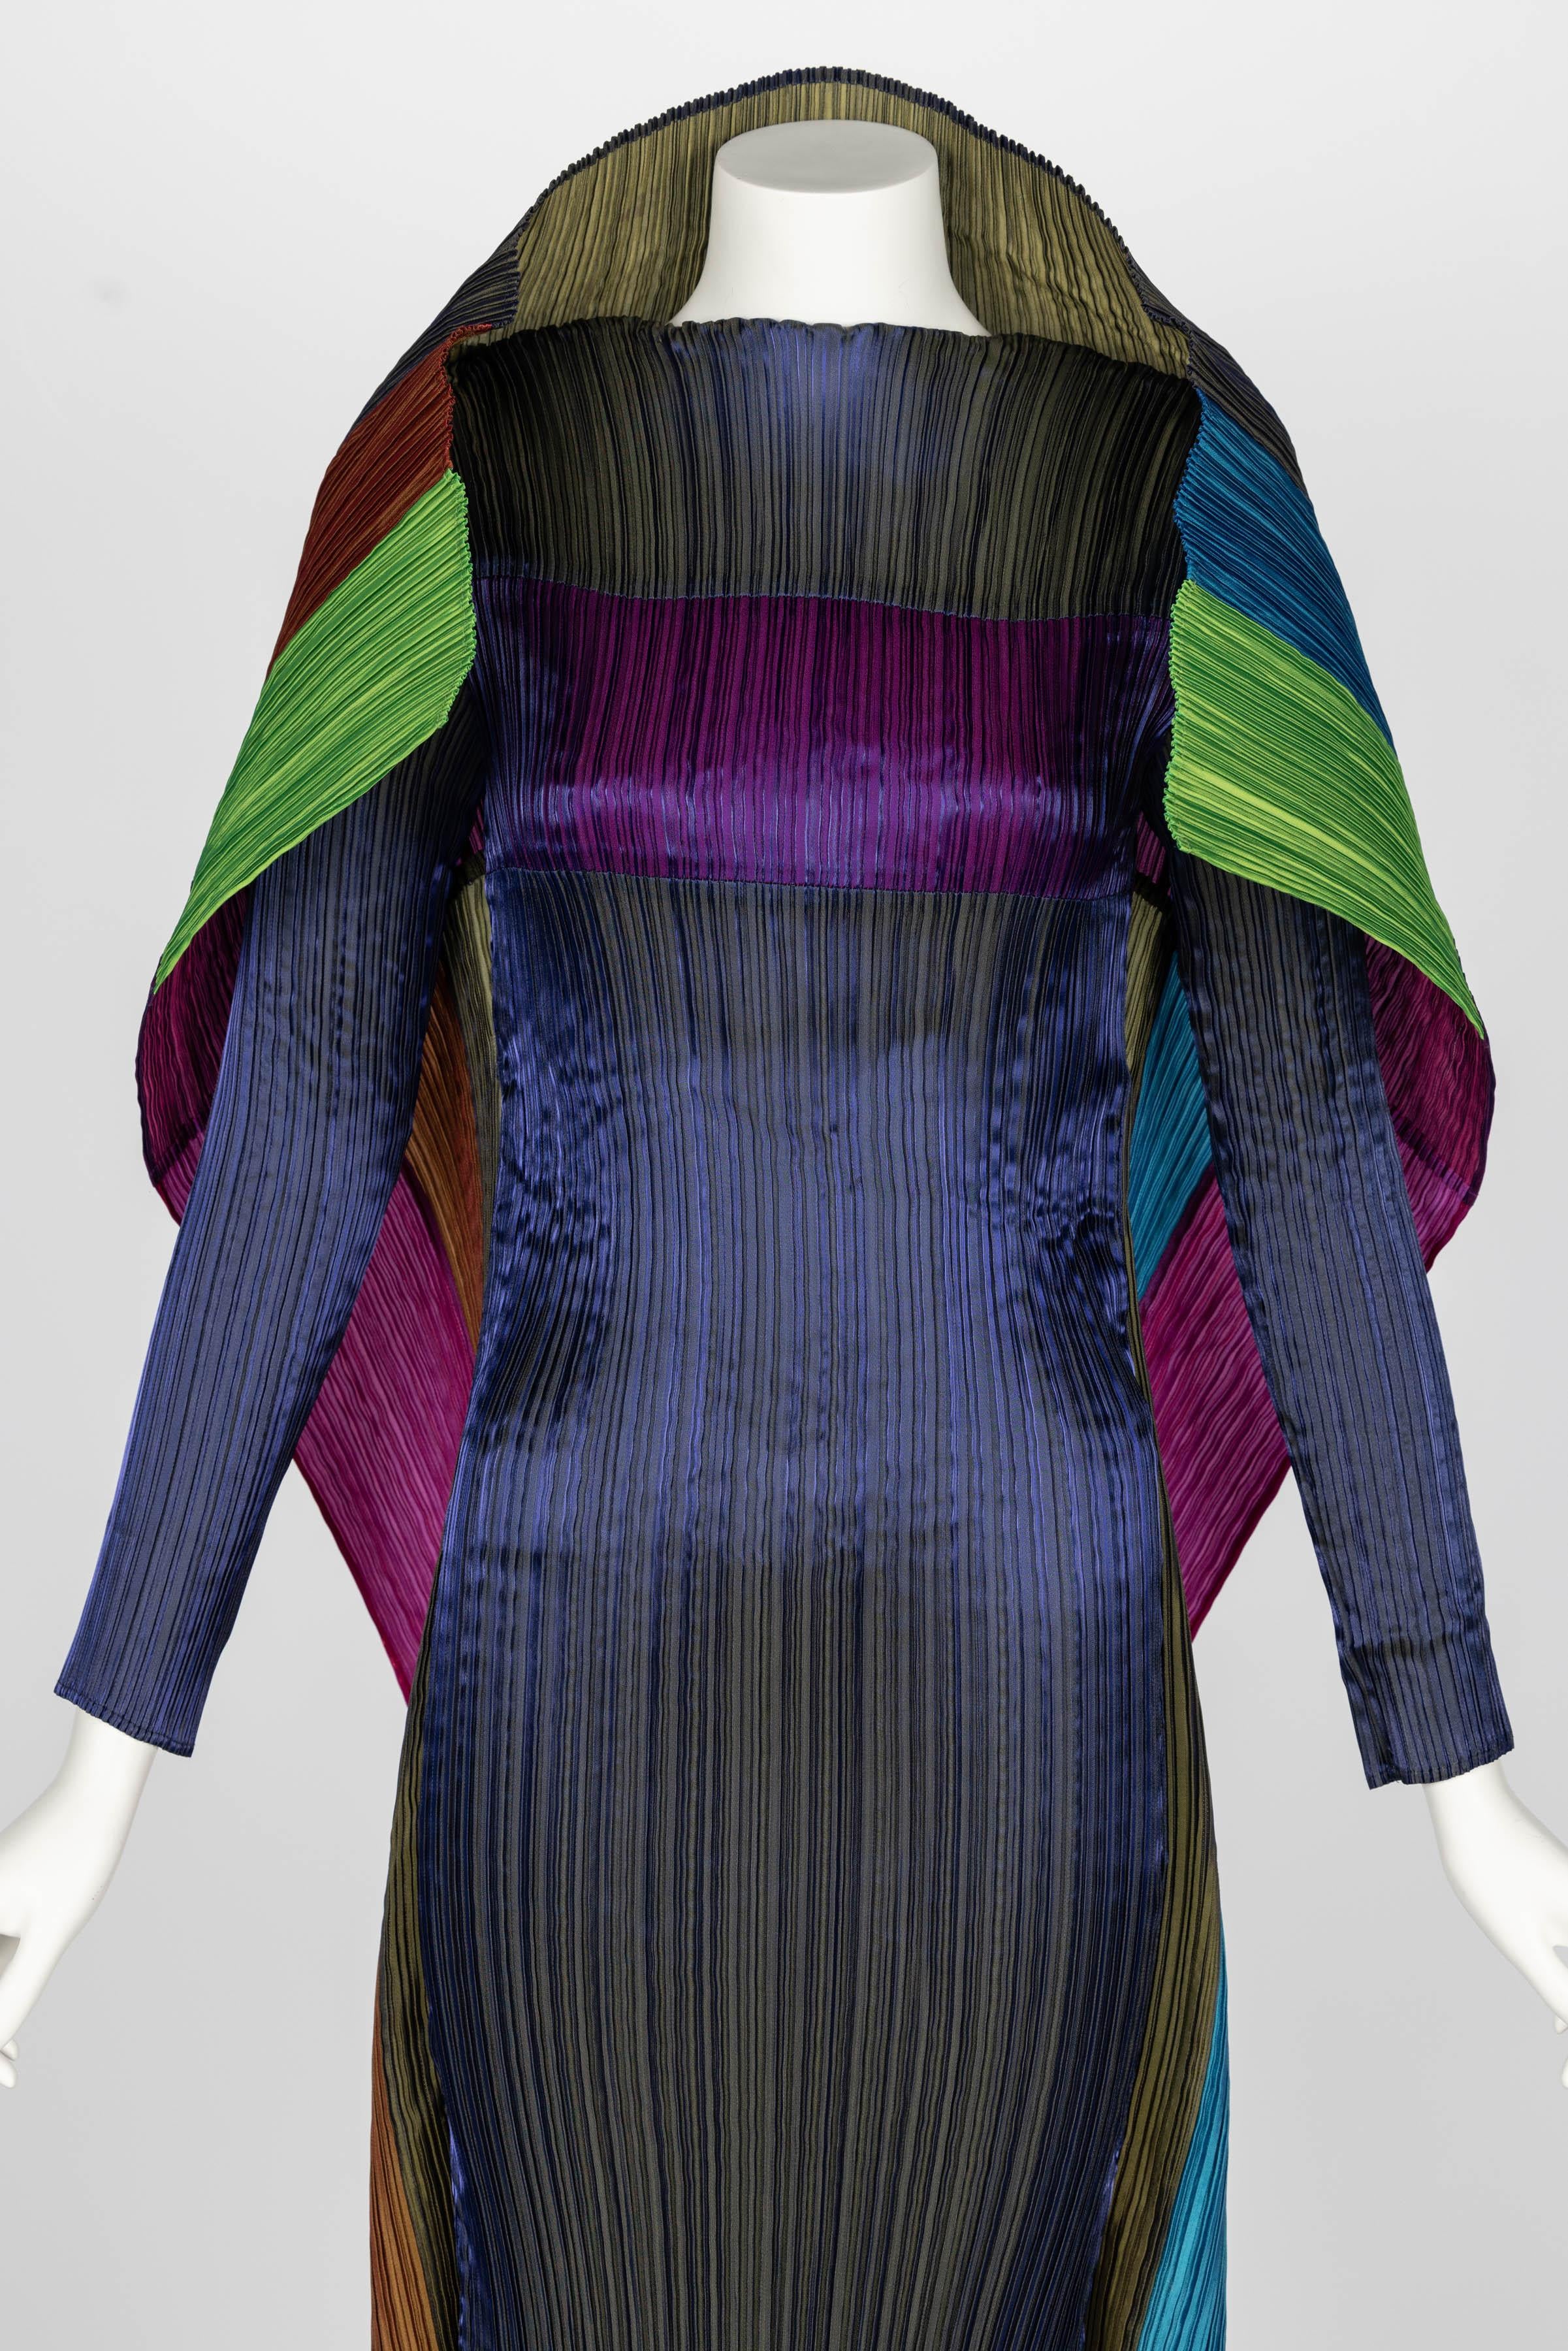 Incredible Rare Issey Miyake Pleats Please Avant Garde Color Block Dress For Sale 8